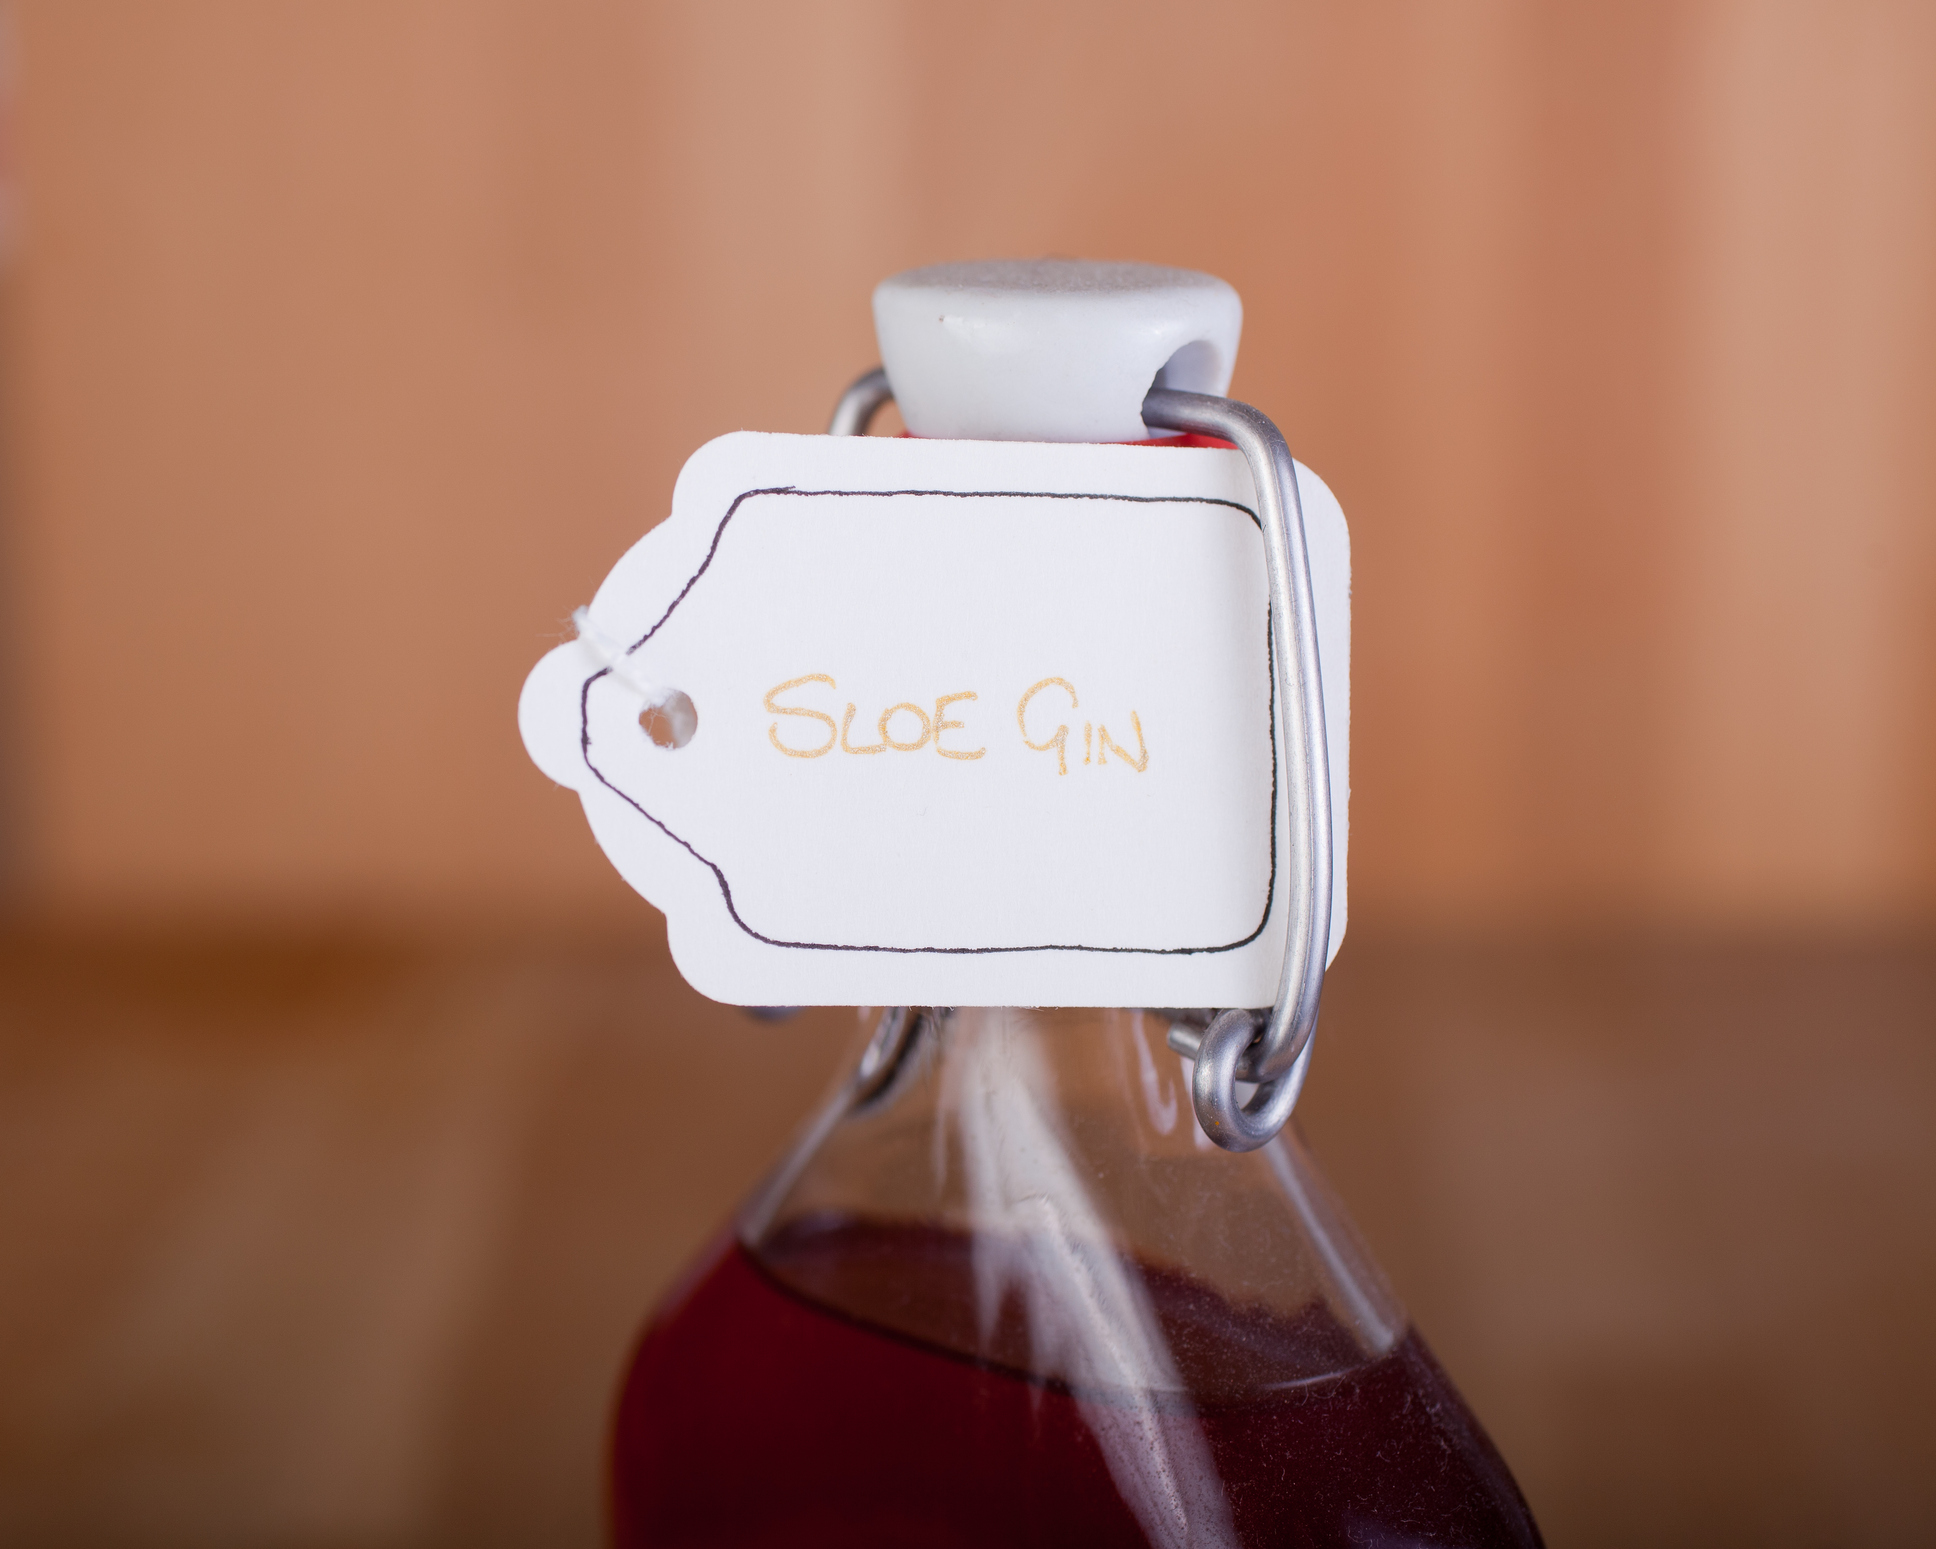 Sloe gin. © PABImages/Getty